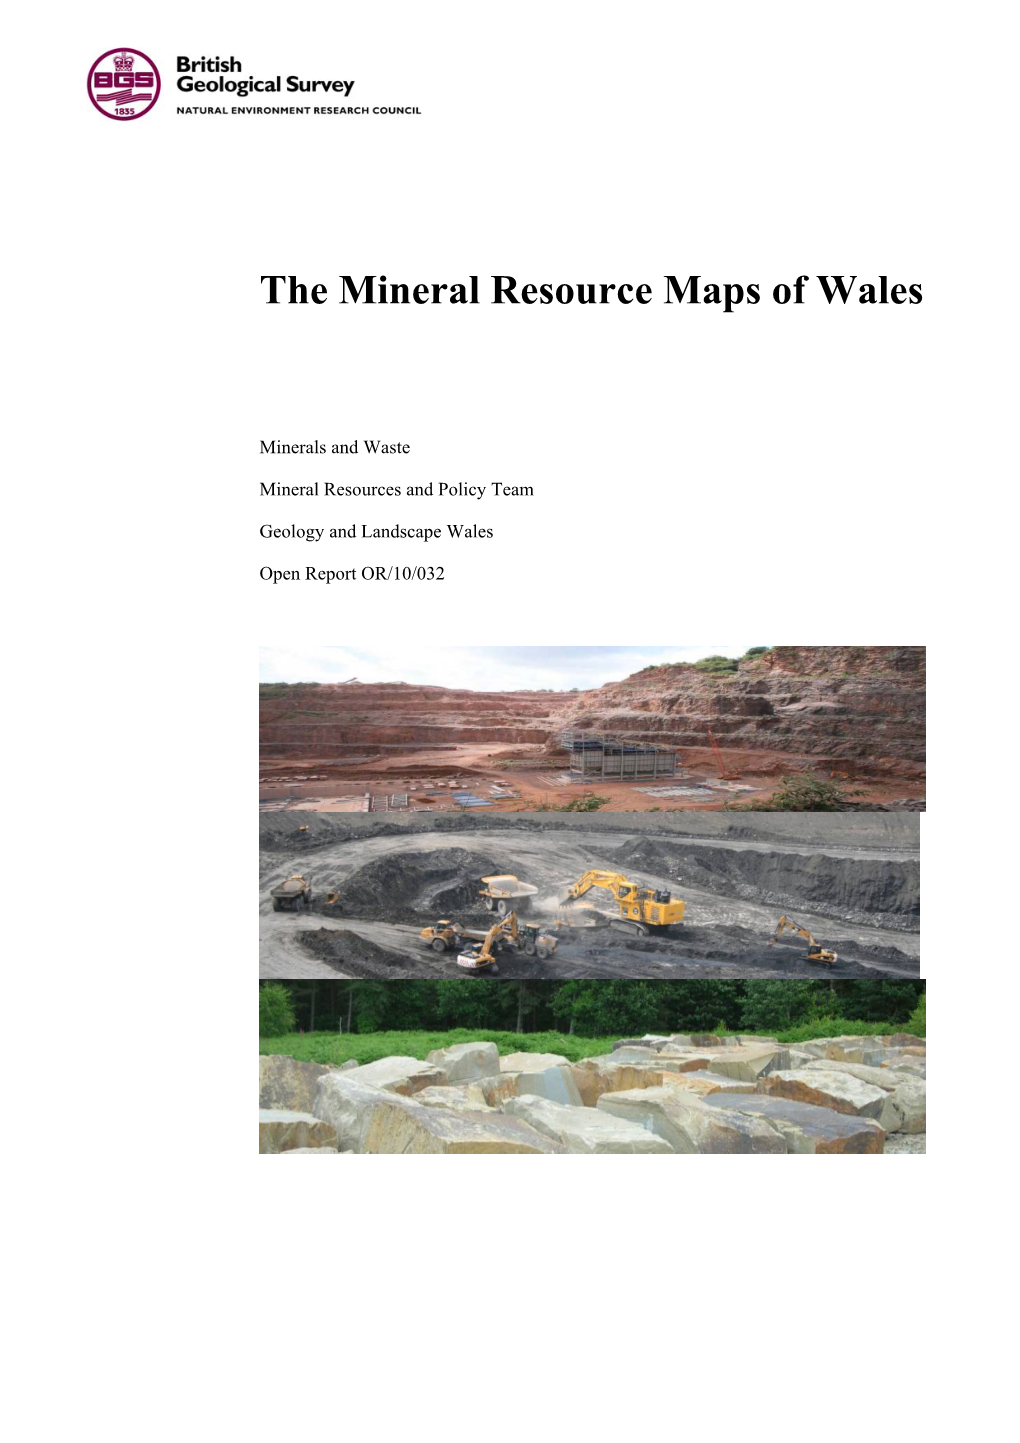 The Mineral Resource Maps of Wales